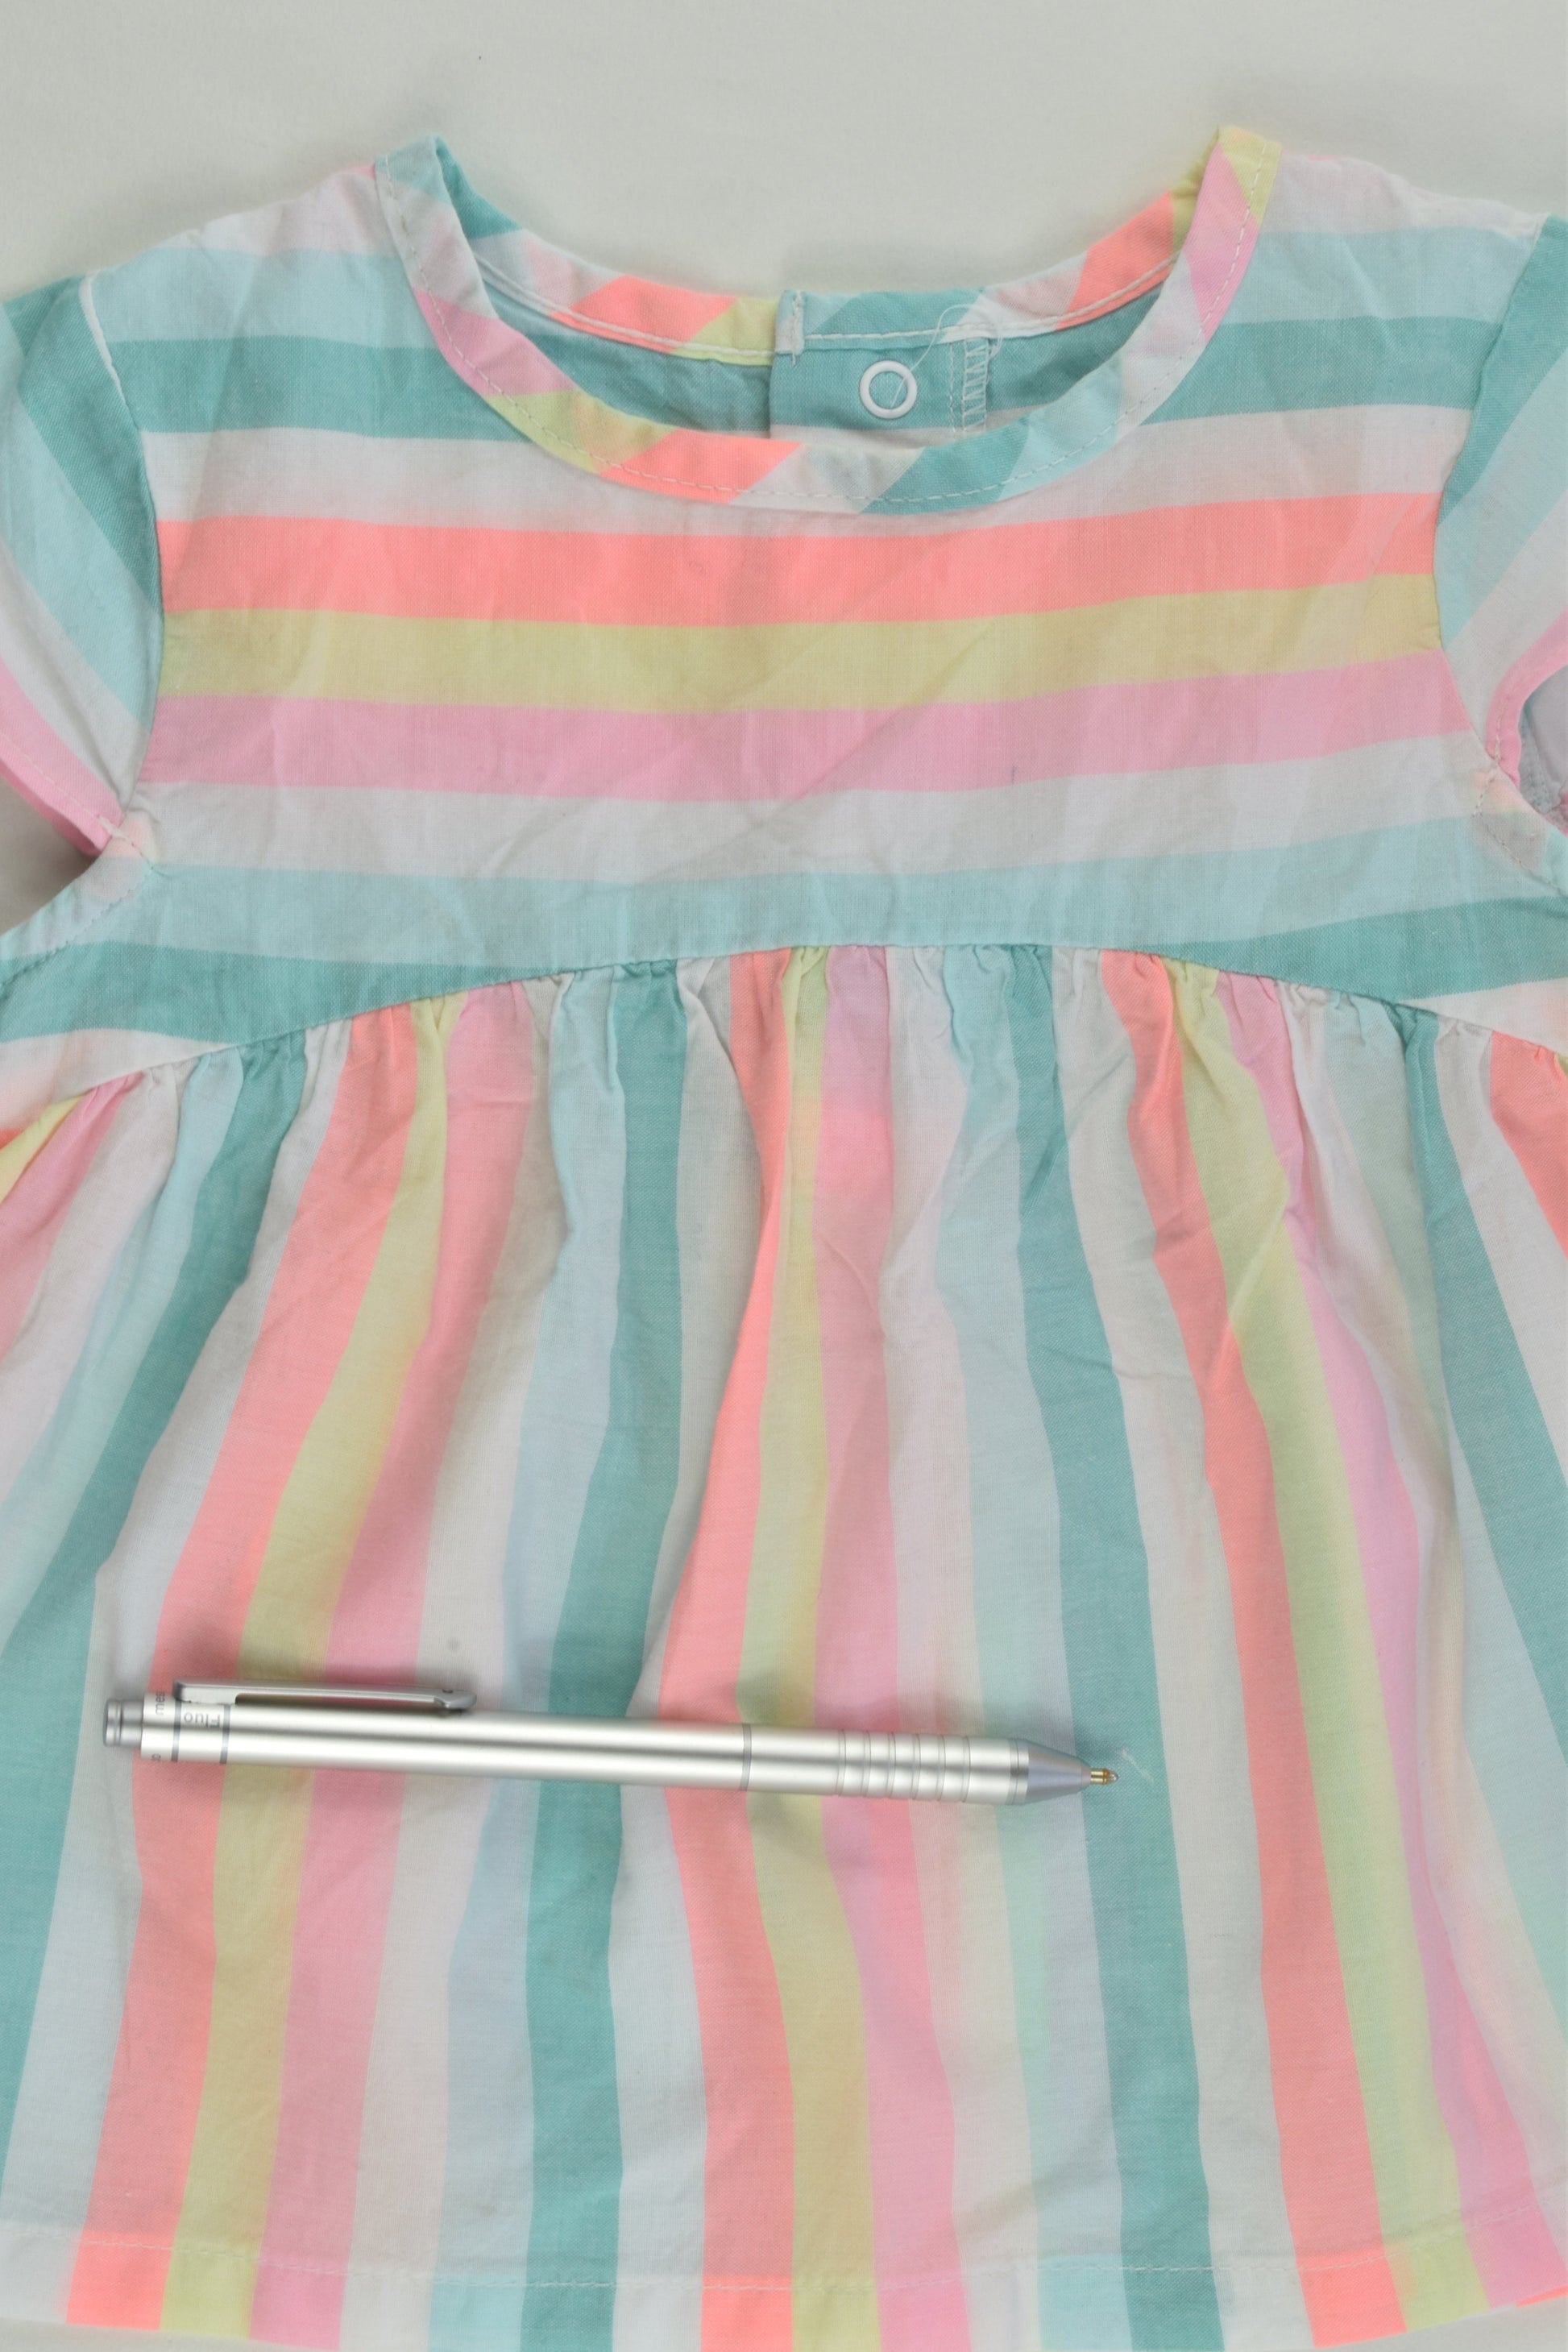 Carter's Size 0 (12 months) Striped Blouse